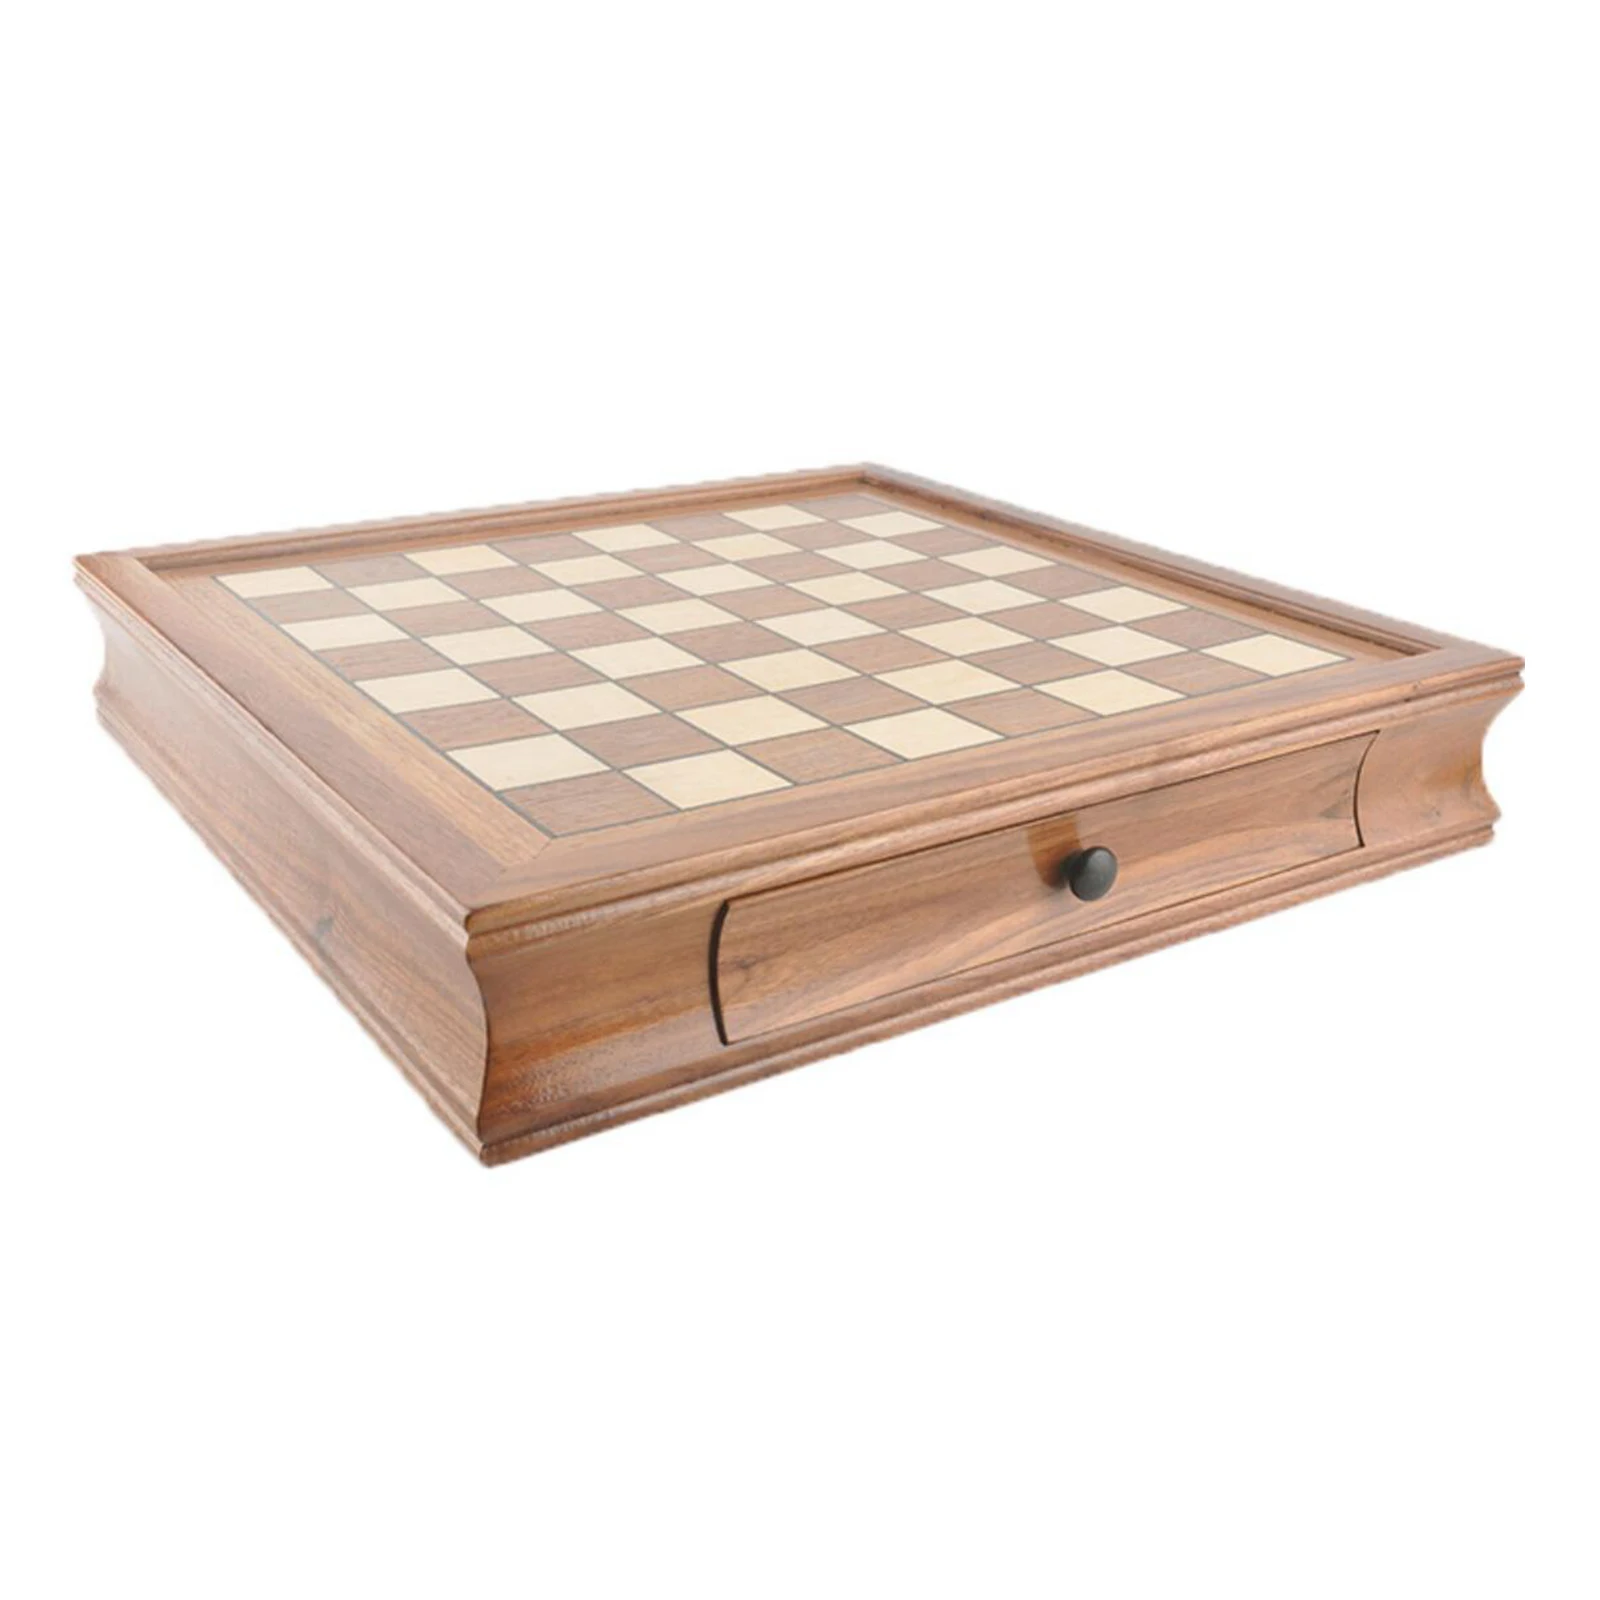 32cmx32cm Magnetic Wooden Chess Set Walnut with Storage Drawer Portable Top Quality Board Game for Kids Toy Puzzle